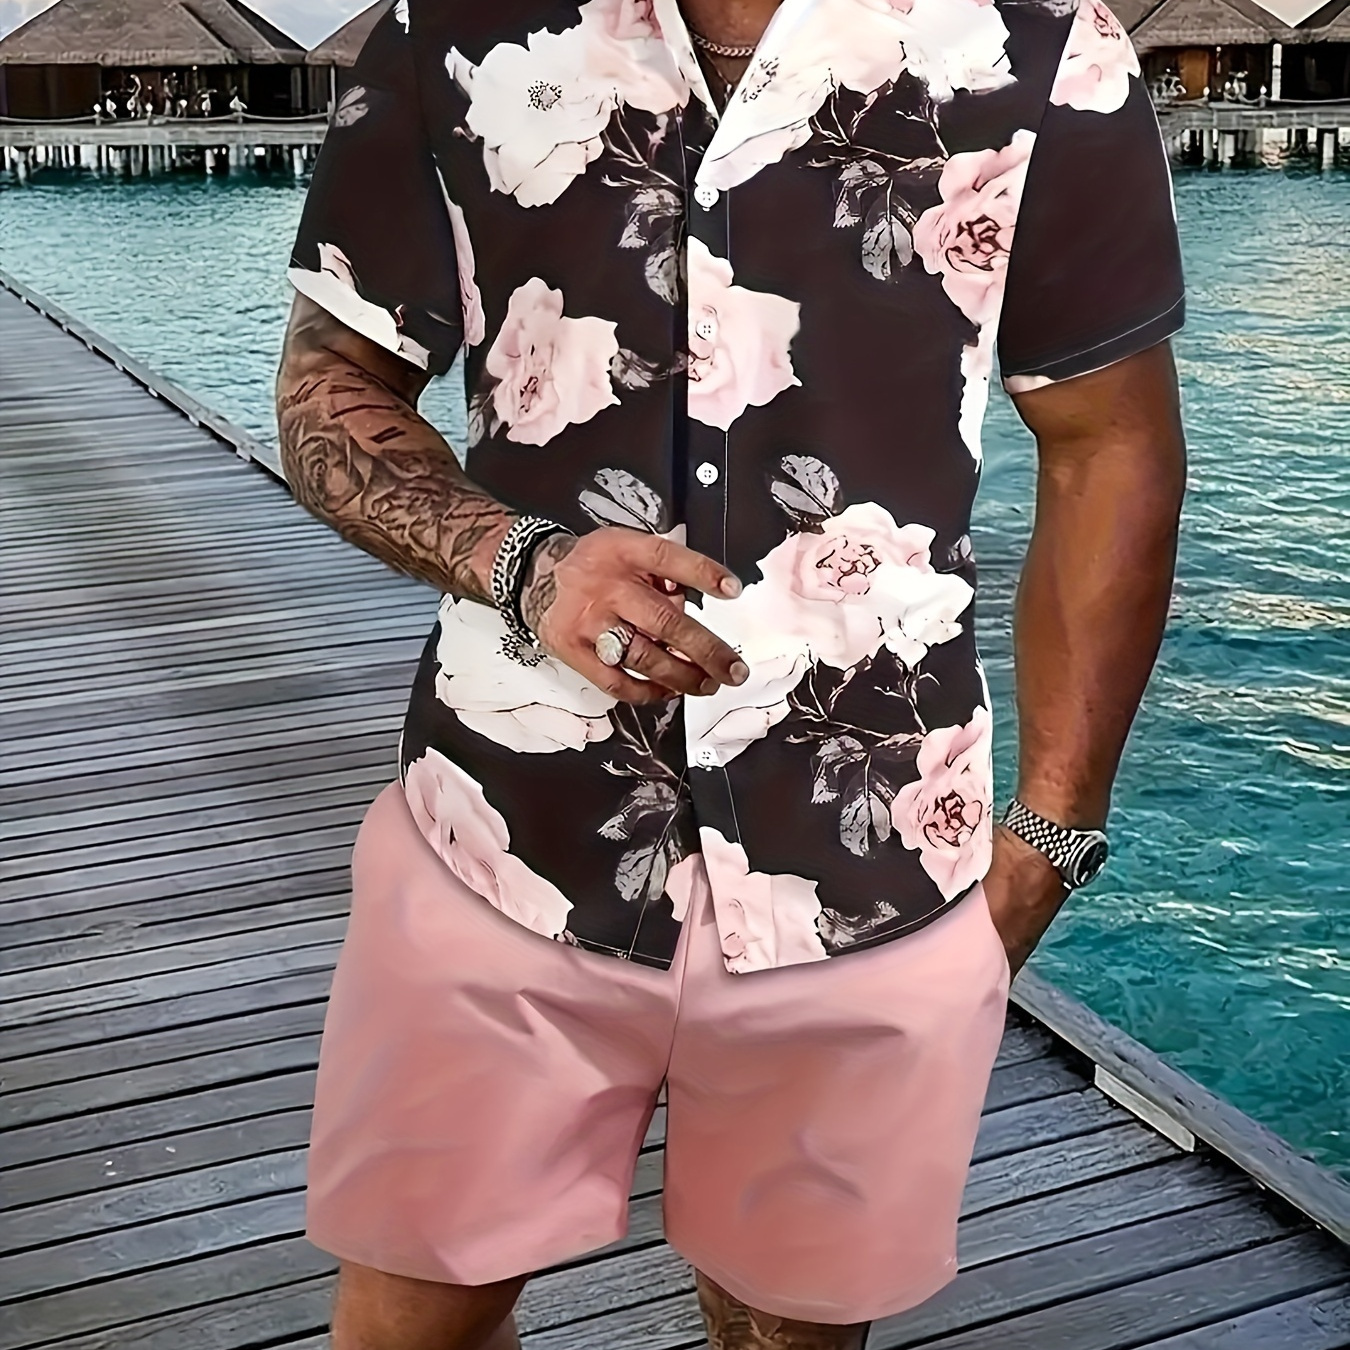 

Floral Pattern Men's Fashionable And Simple Short Sleeve Button Casual Lapel Shirt, Trendy And Versatile, Suitable For Summer Dates, Beach Holiday, As Gifts, Men's Clothing